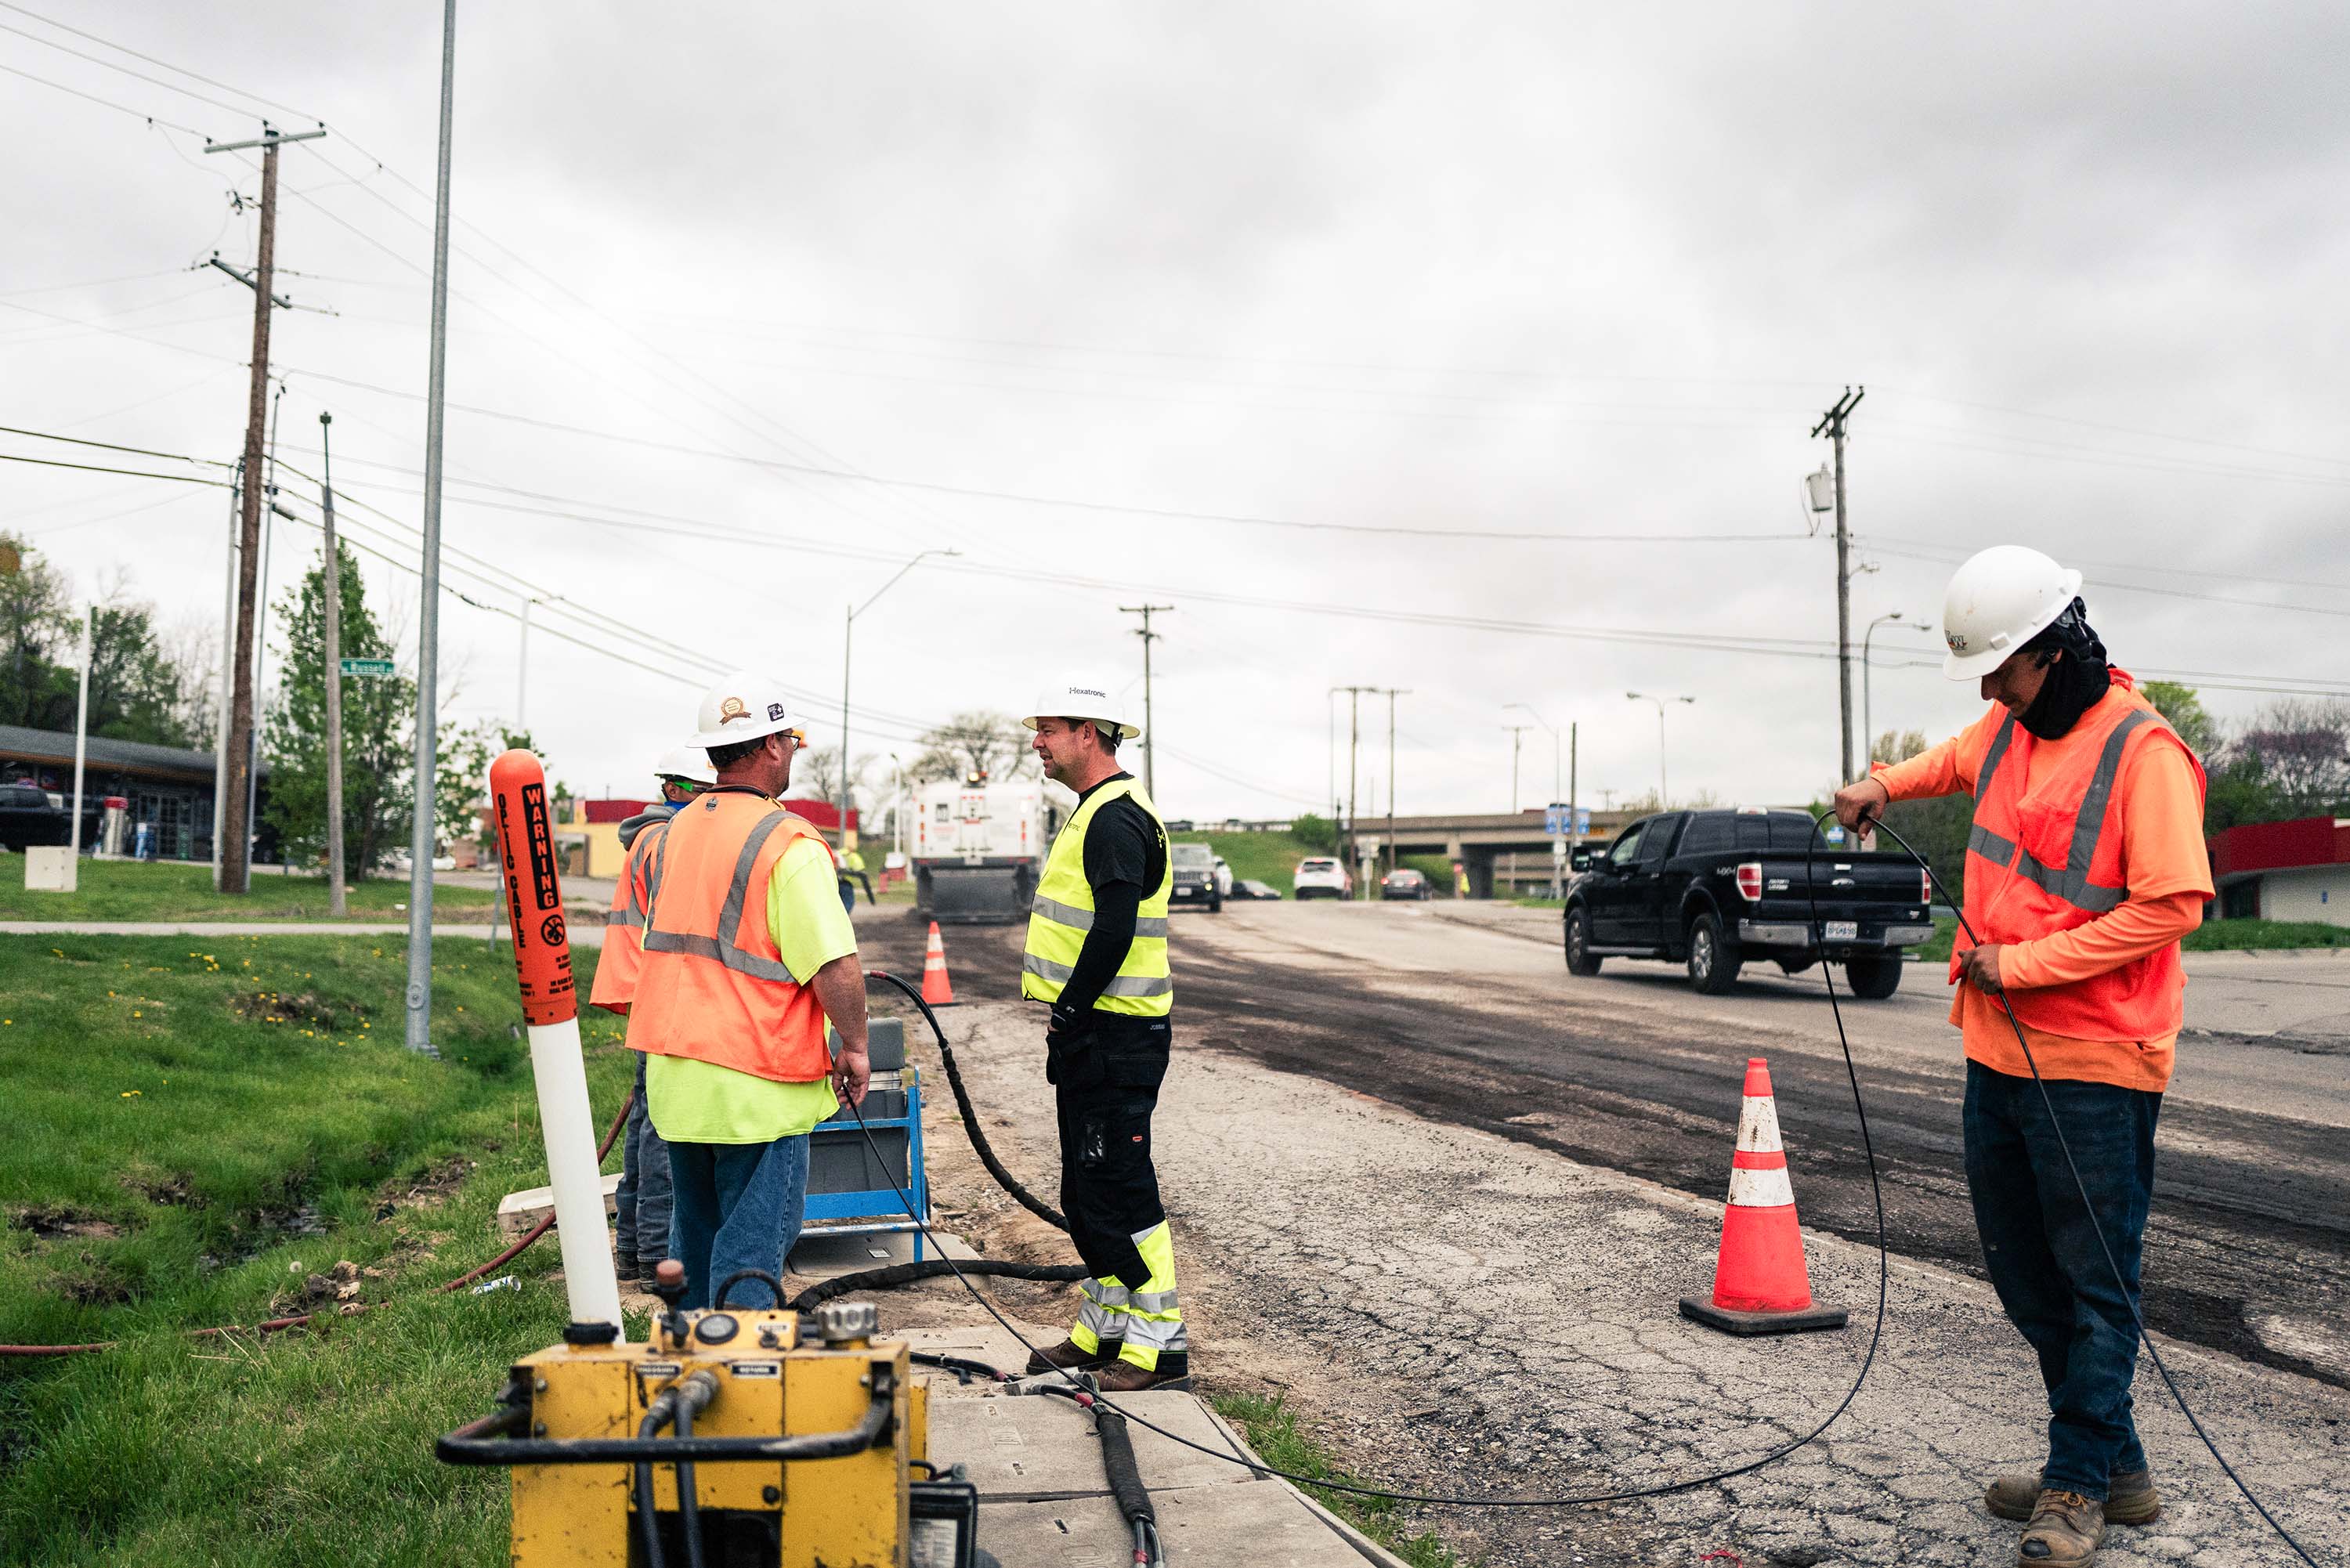 Three workers in safety gear are working on a fiber optic installation at the roadside.